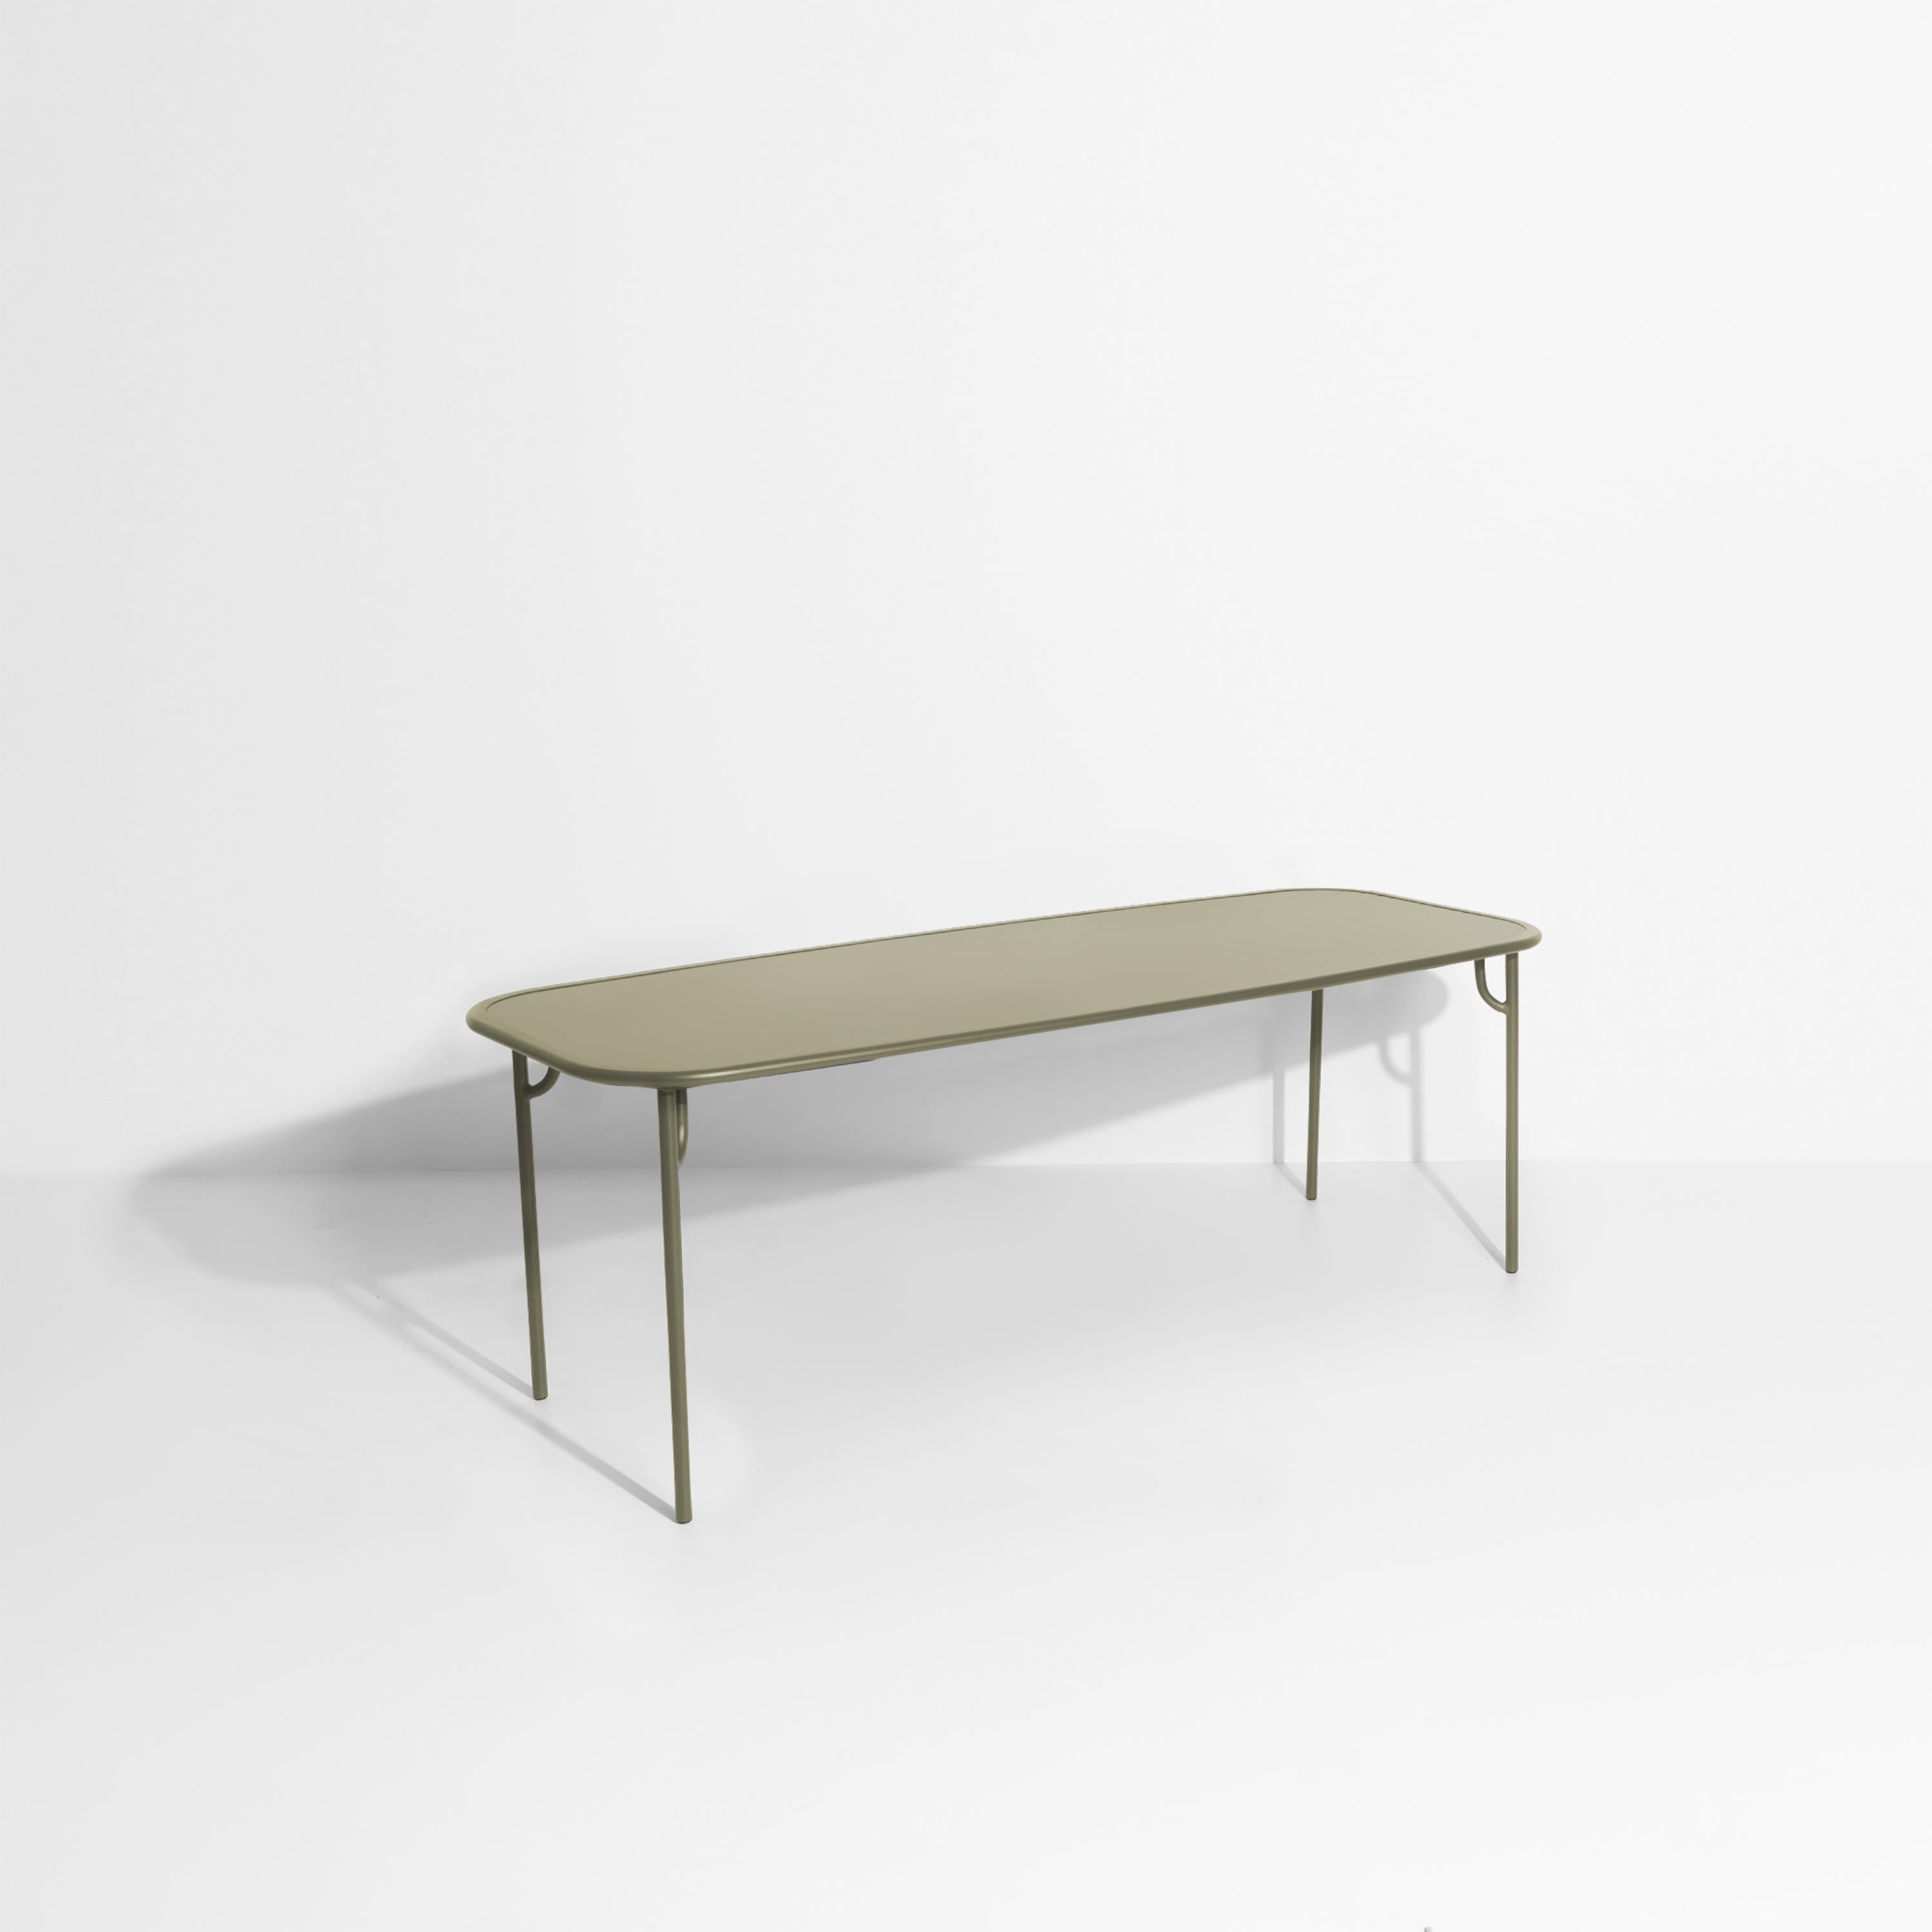 Petite Friture Week-End Large Plain Rectangular Dining Table in Jade Green Aluminium by Studio BrichetZiegler, 2017

The week-end collection is a full range of outdoor furniture, in aluminium grained epoxy paint, matt finish, that includes 18